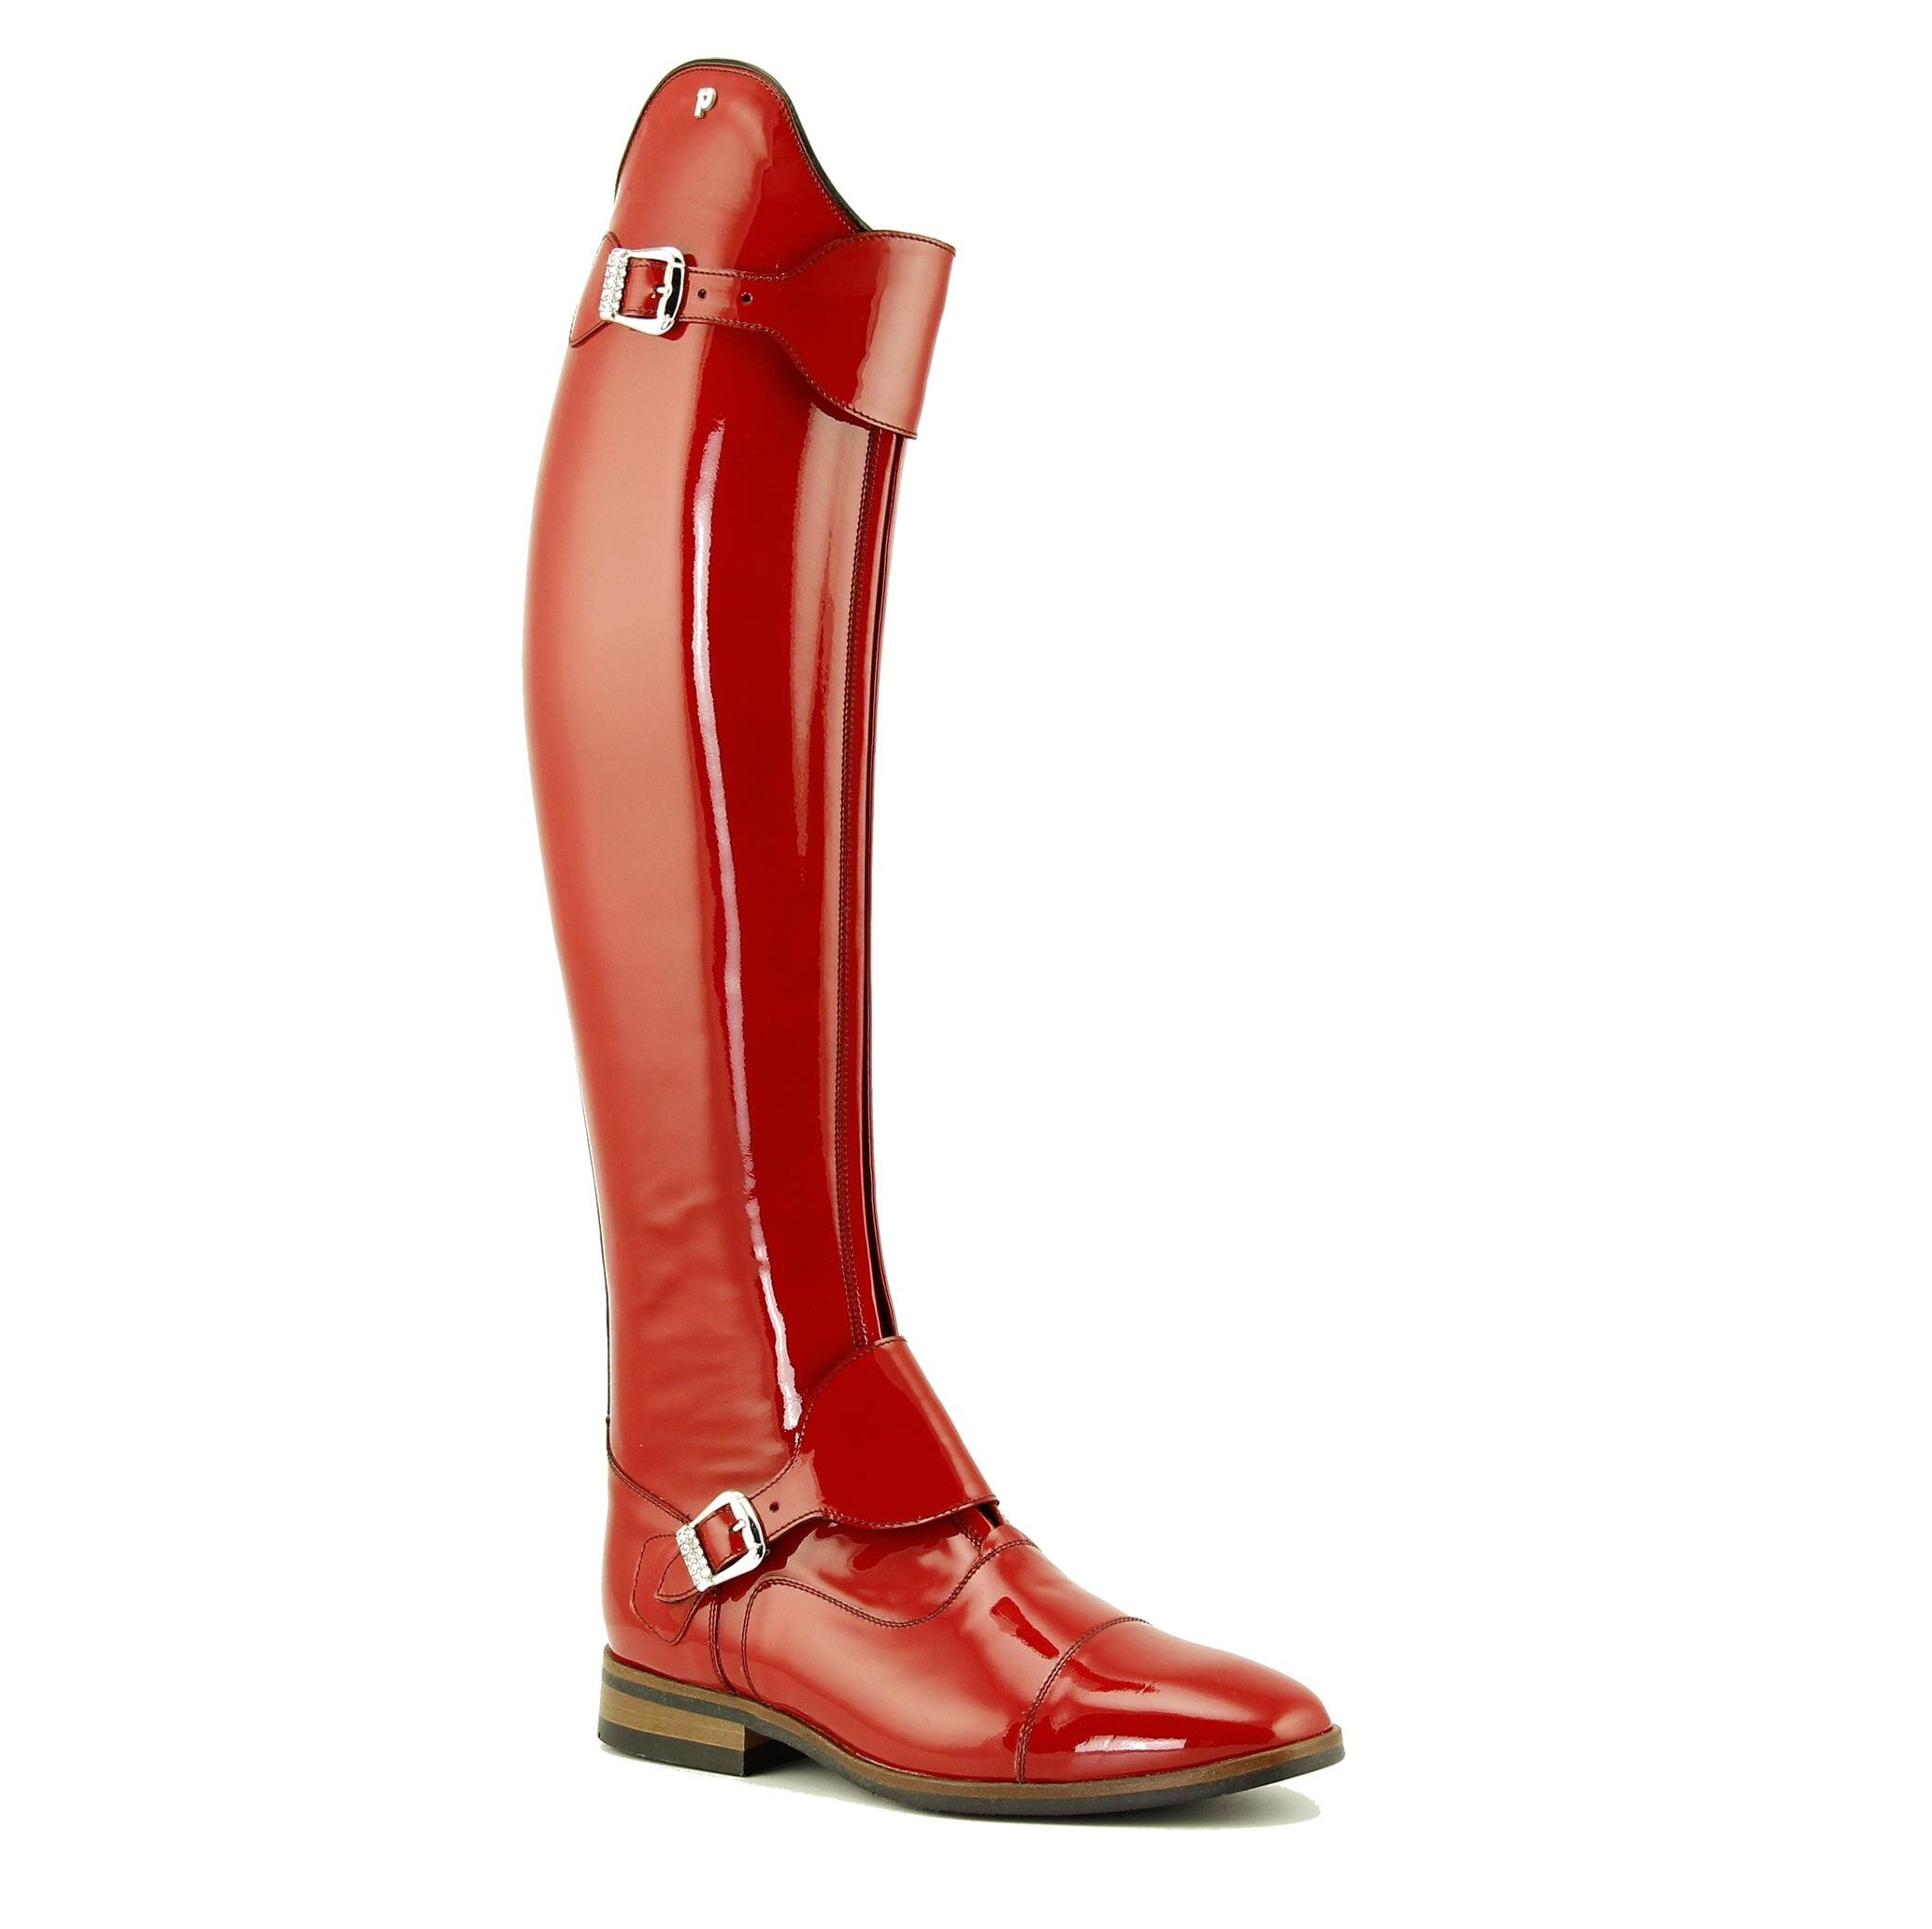 Top quality riding boots since 1857